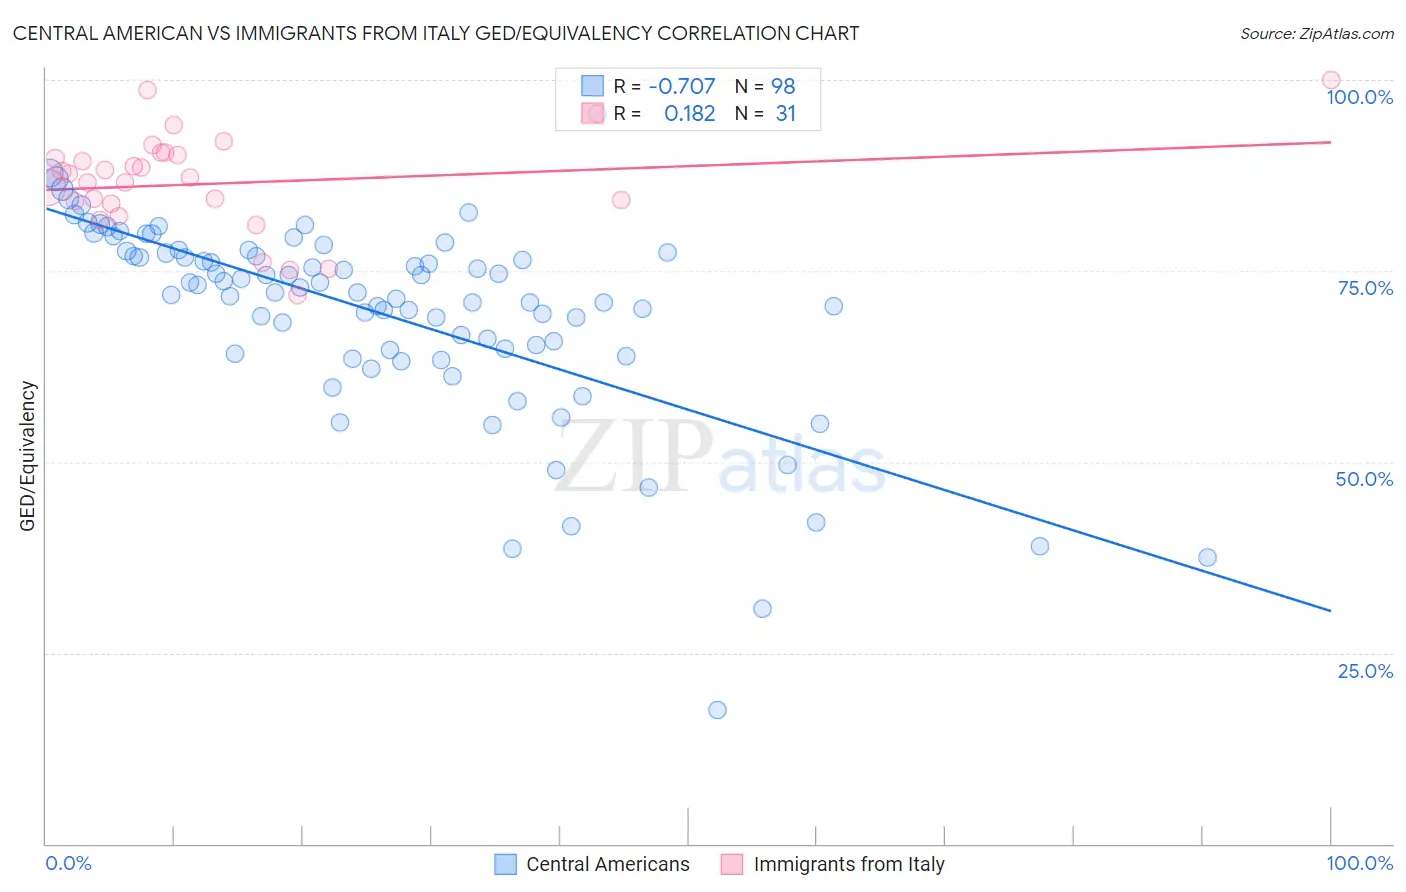 Central American vs Immigrants from Italy GED/Equivalency